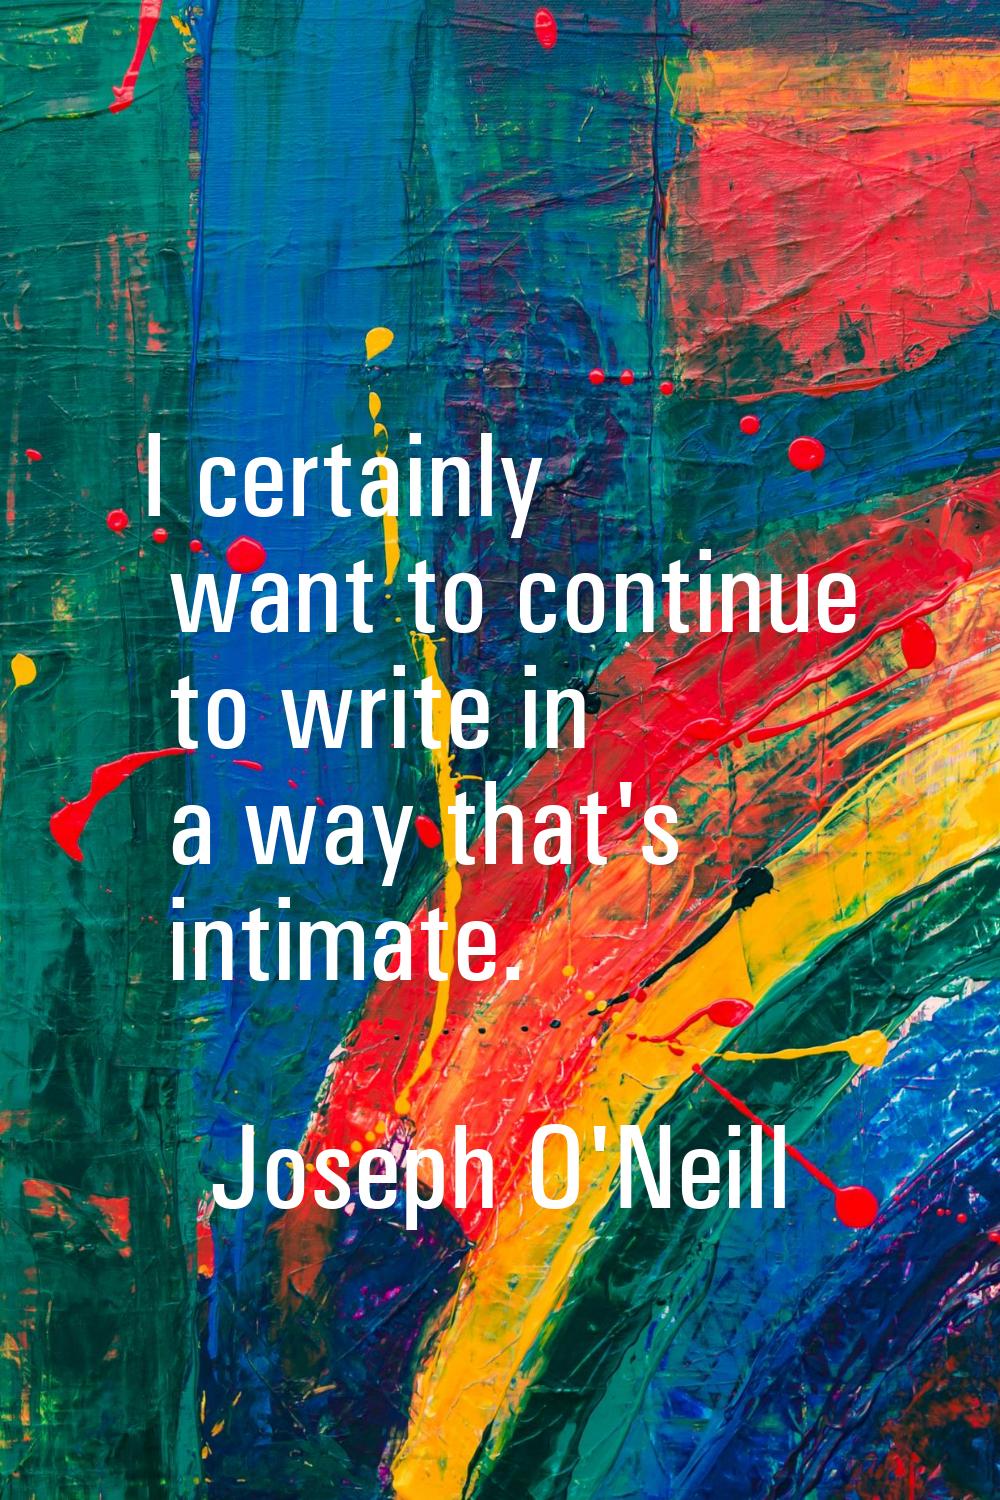 I certainly want to continue to write in a way that's intimate.